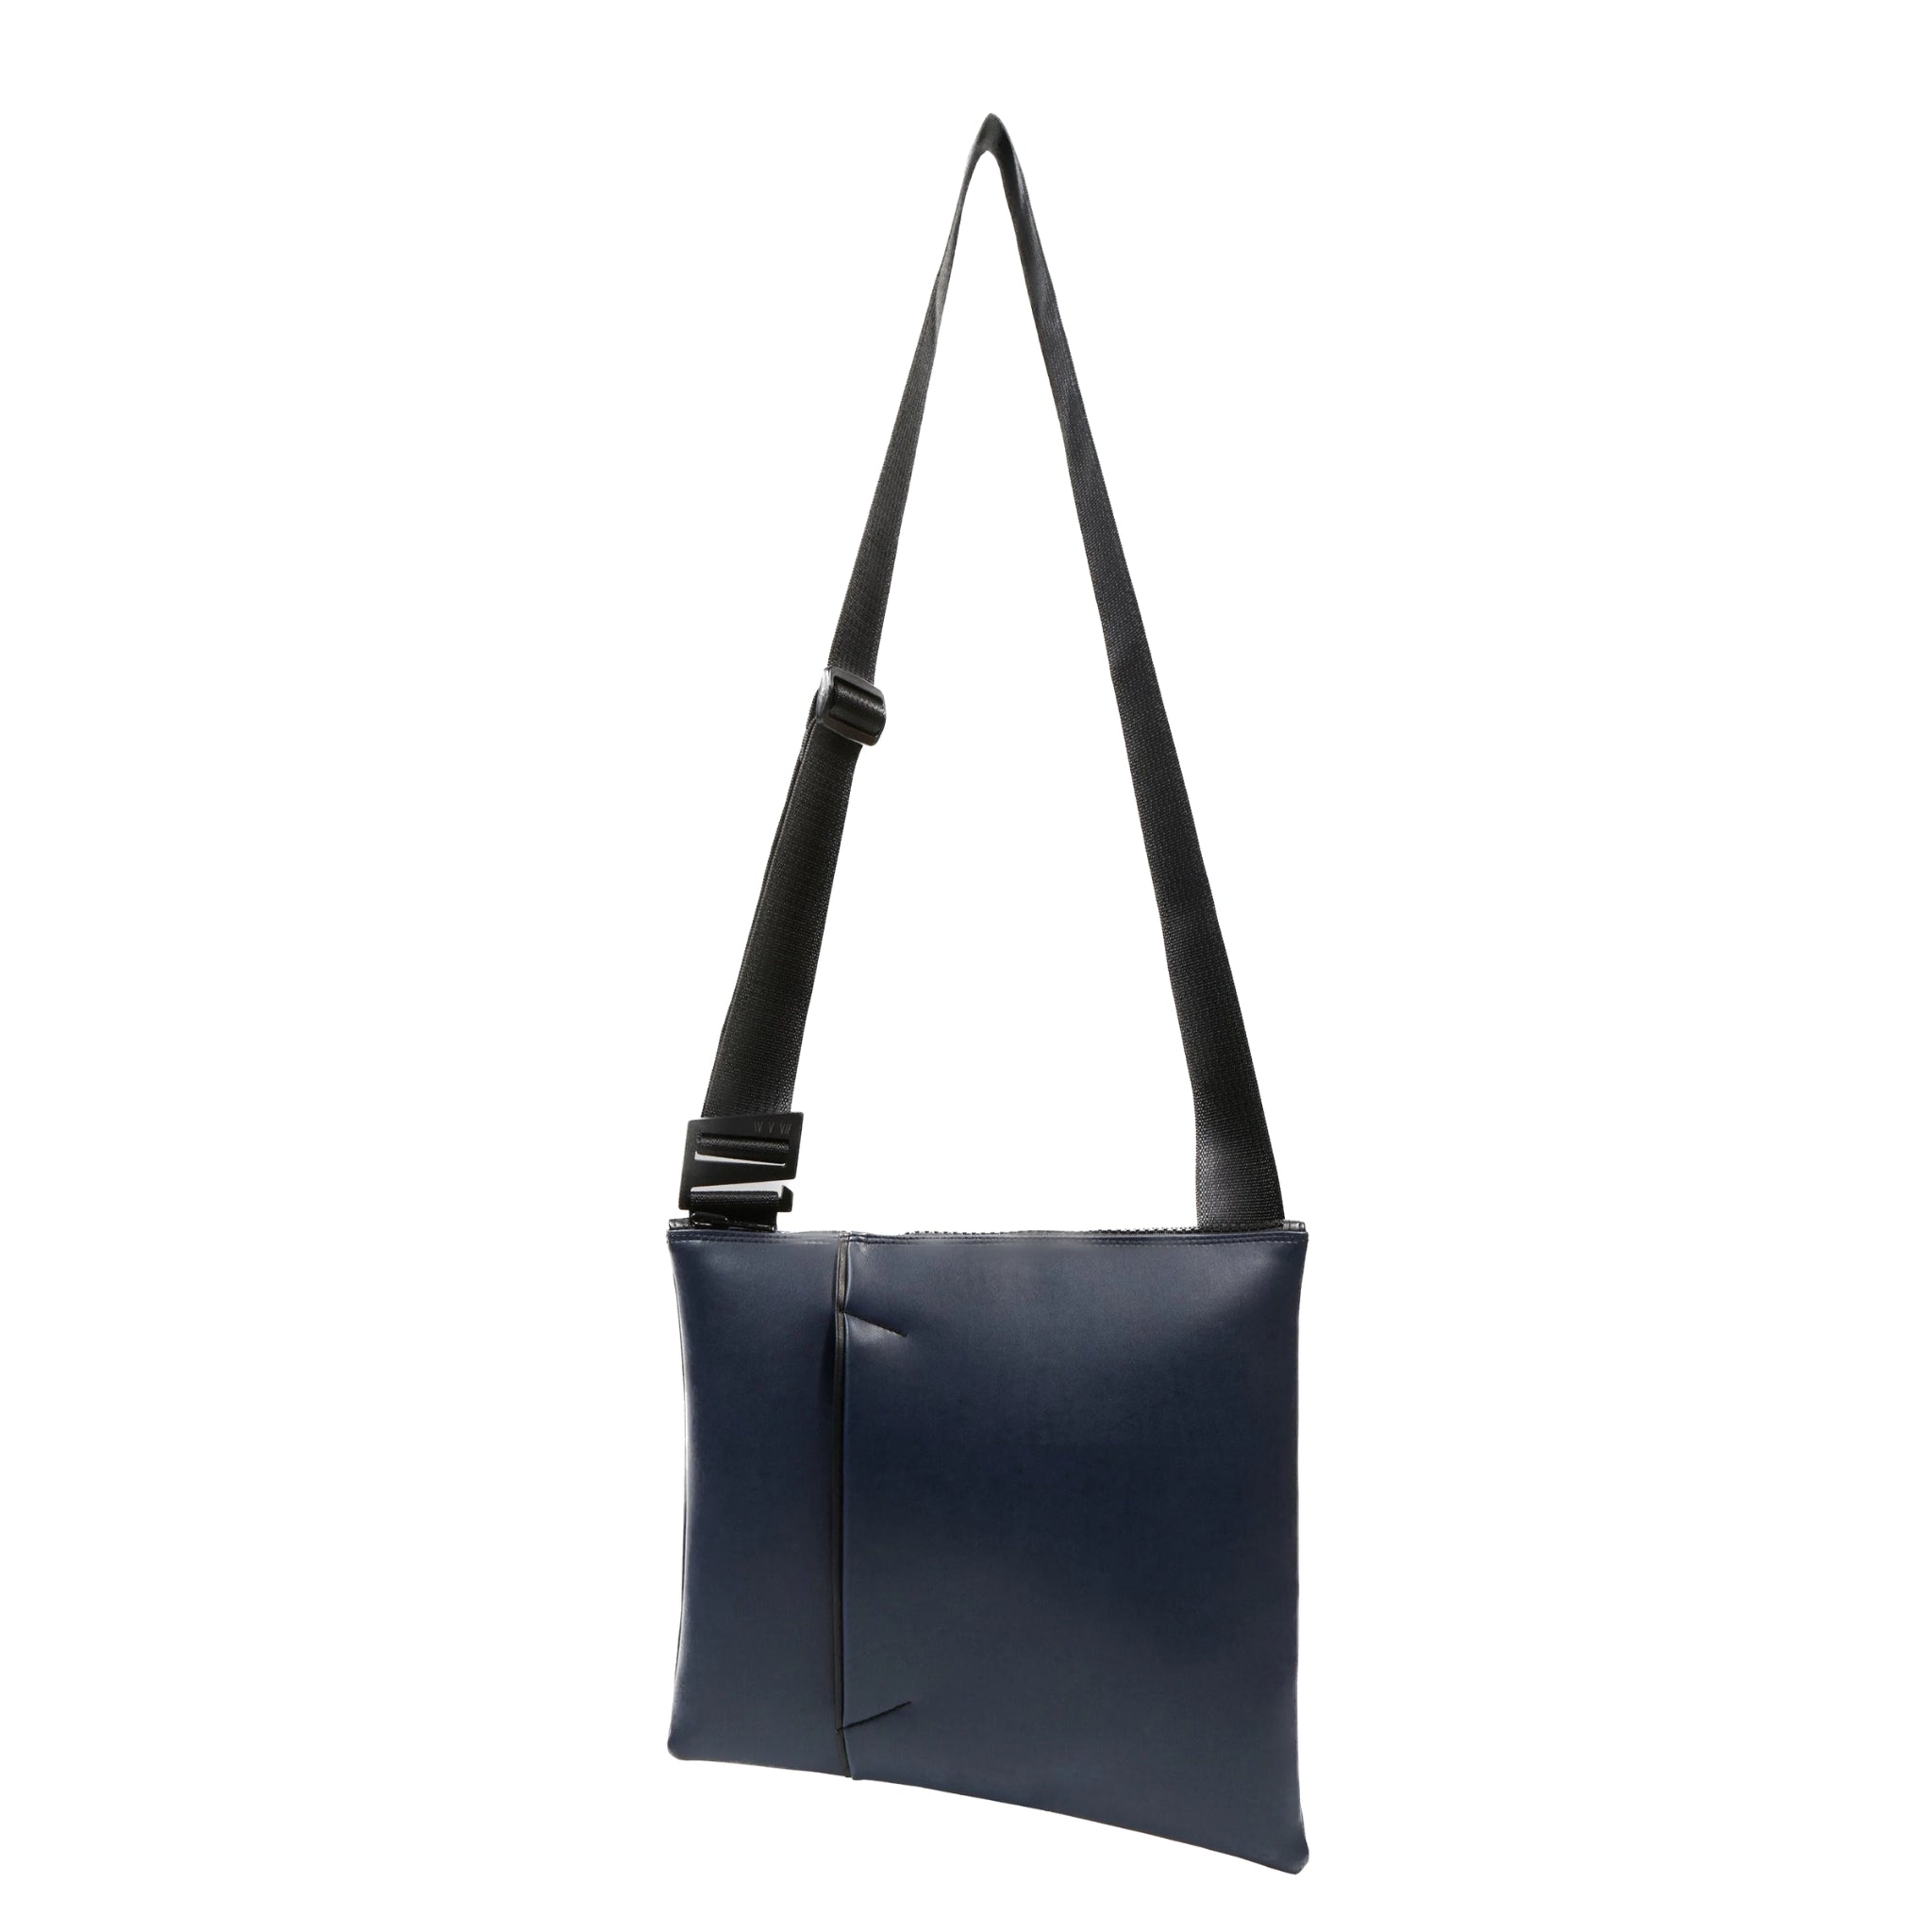 The ANDO satchel in navy vegan leather (desserto). Product shown at the front/center of a white background